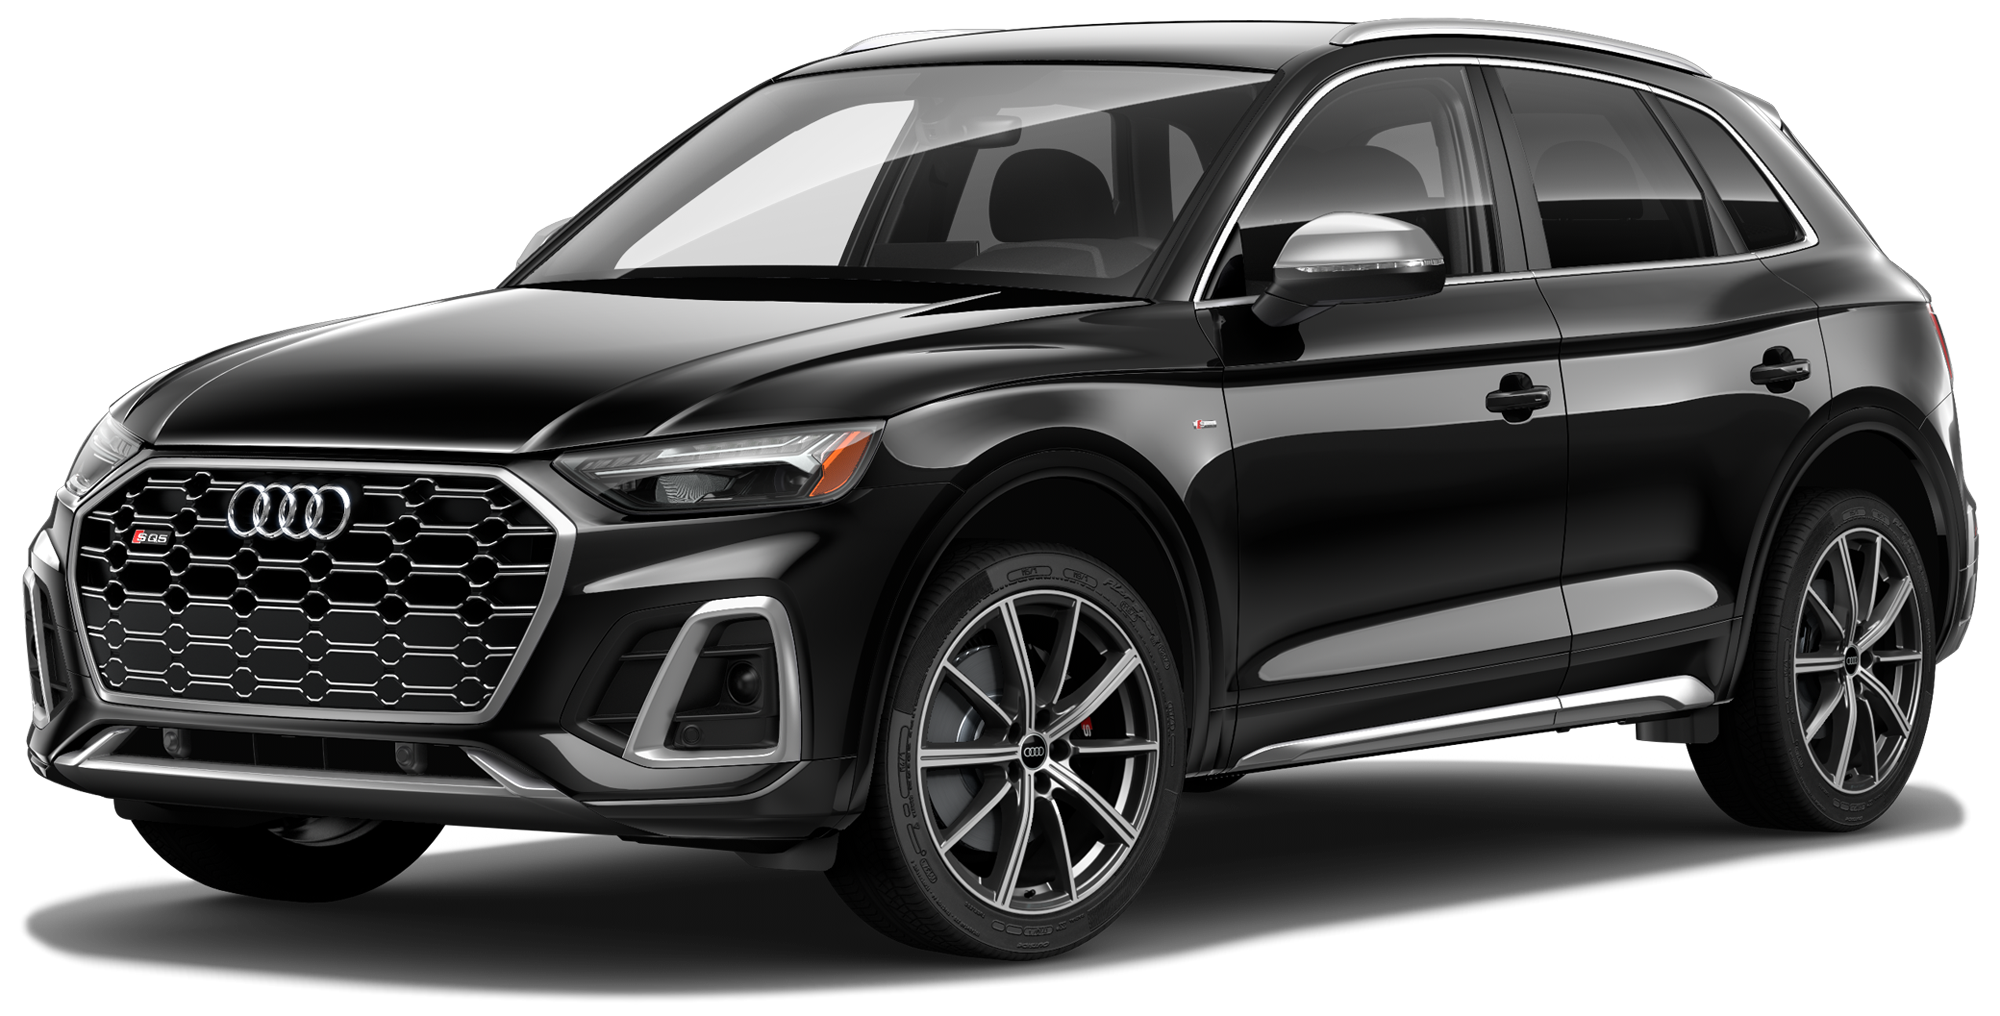 2021 Audi SQ5 Incentives, Specials & Offers in Burlingame CA